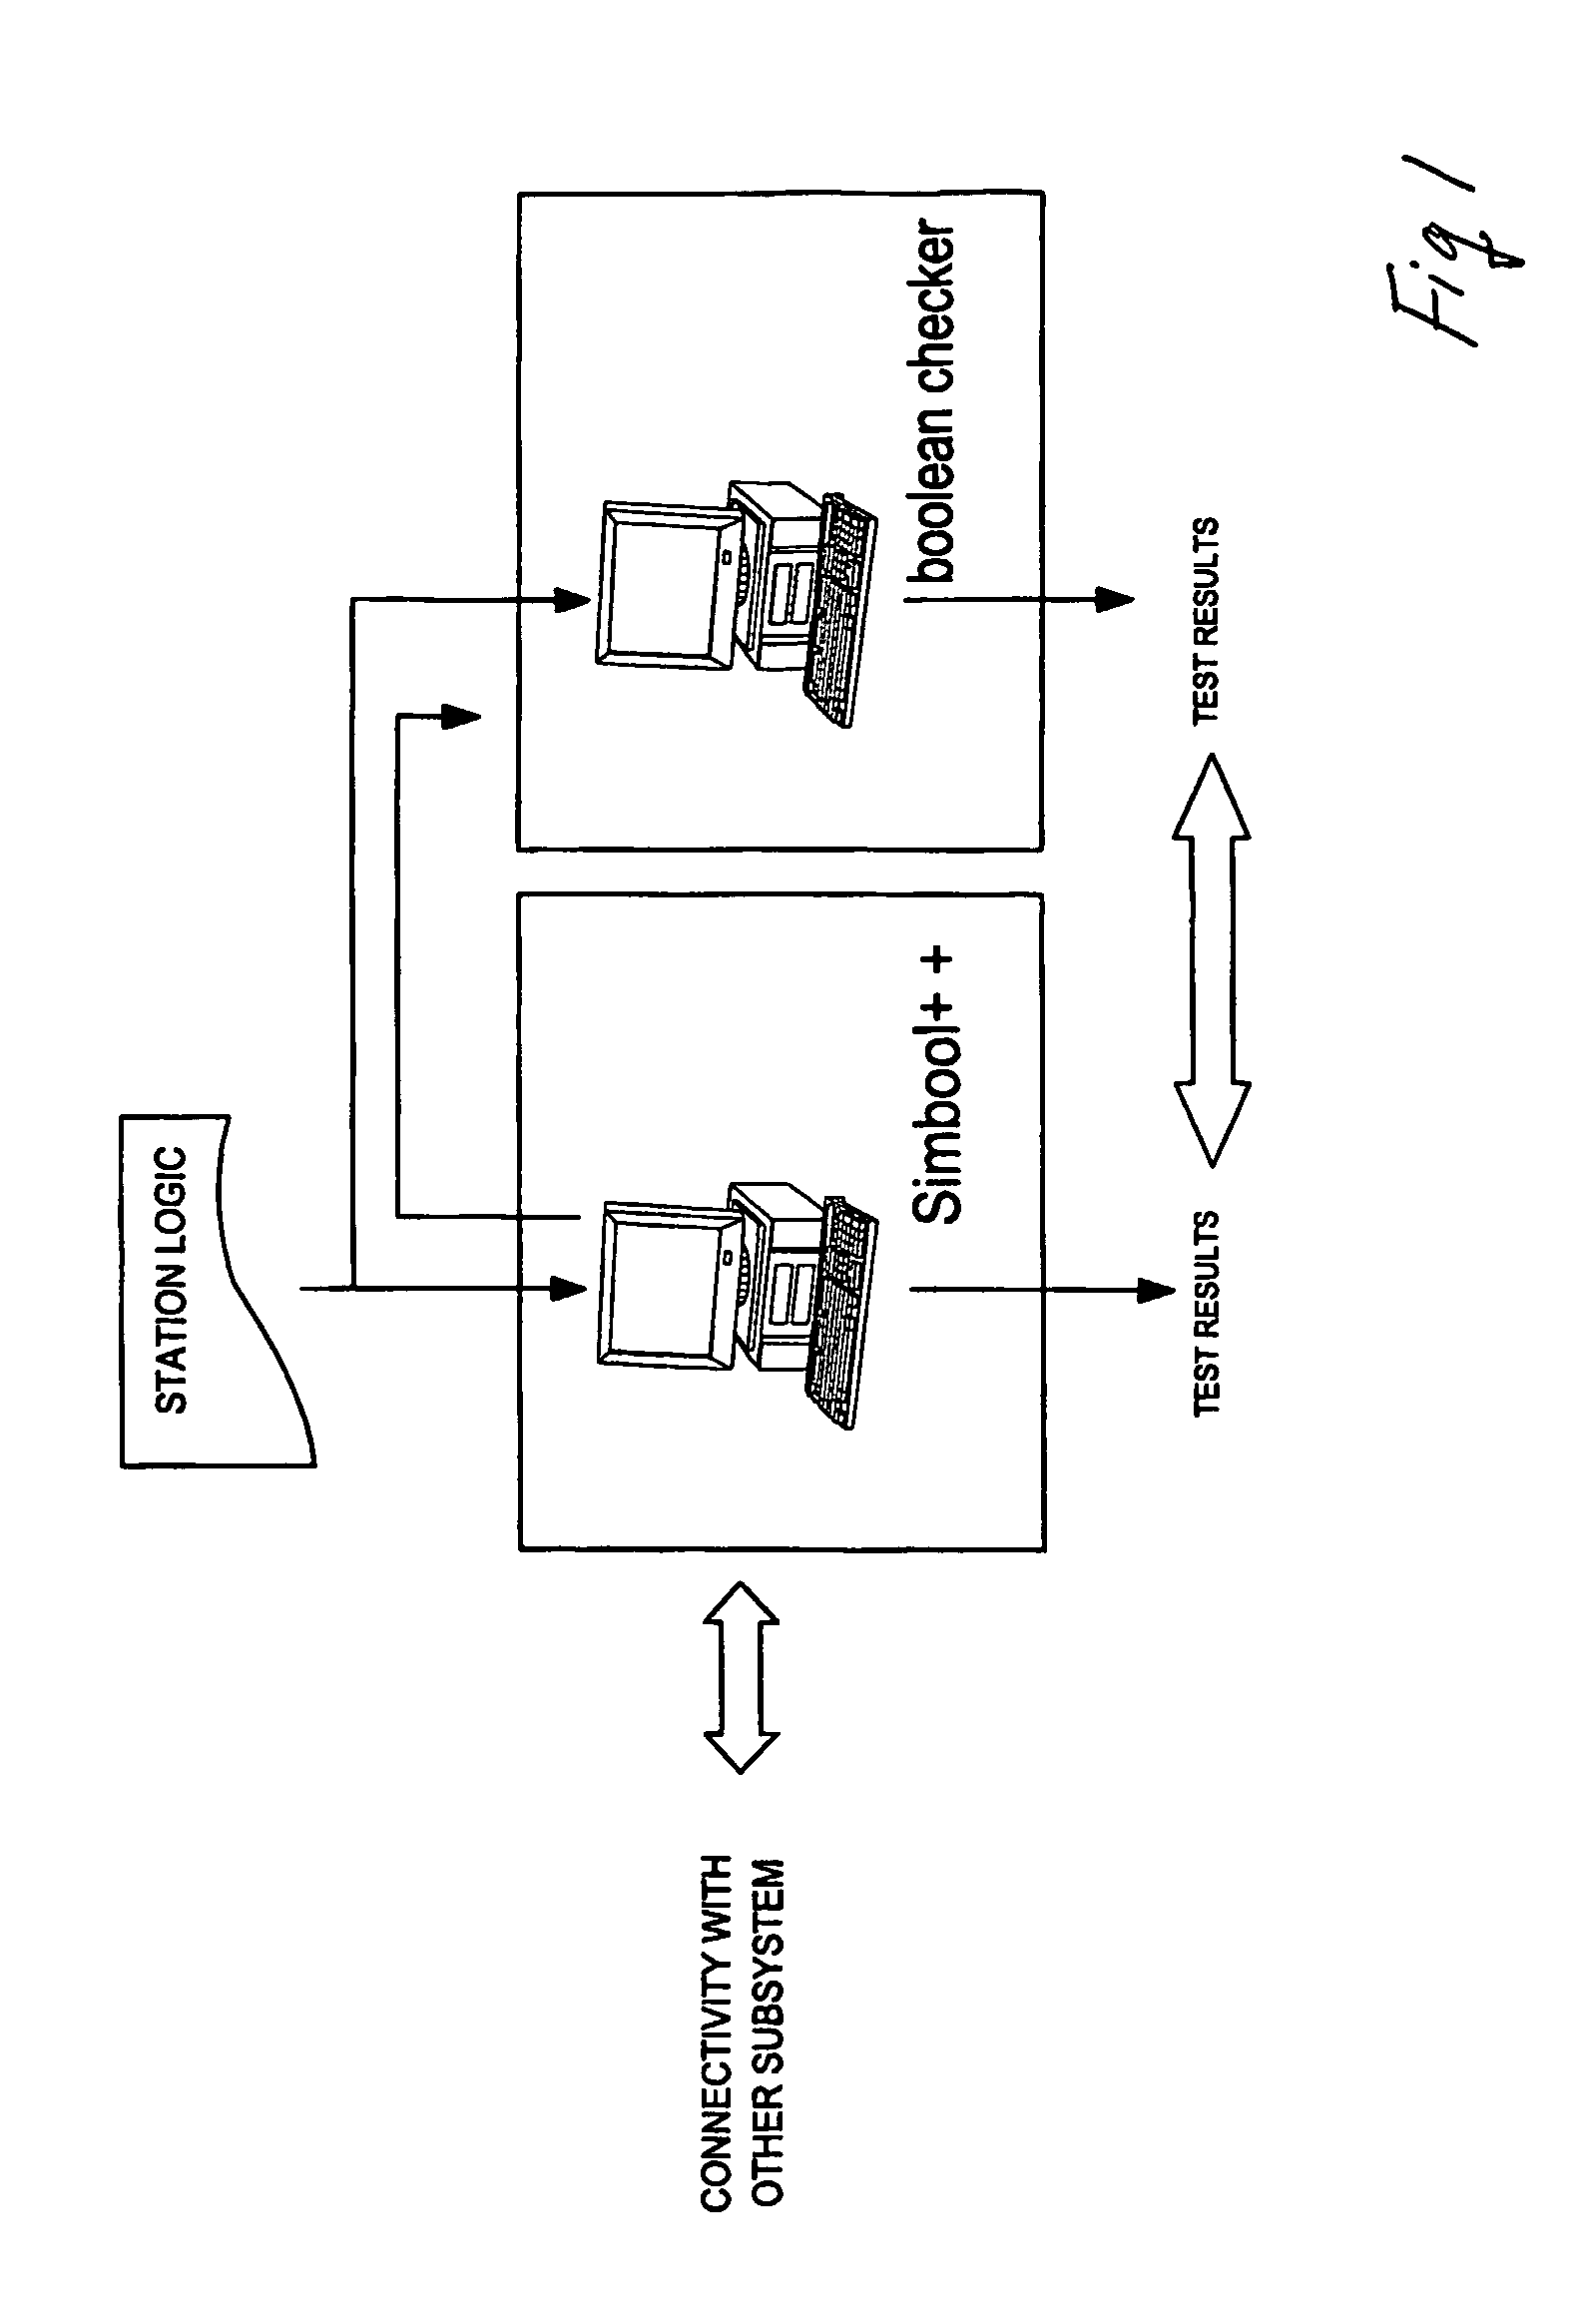 Device and method for checking railway logical software engines for commanding plants, particularly station plants